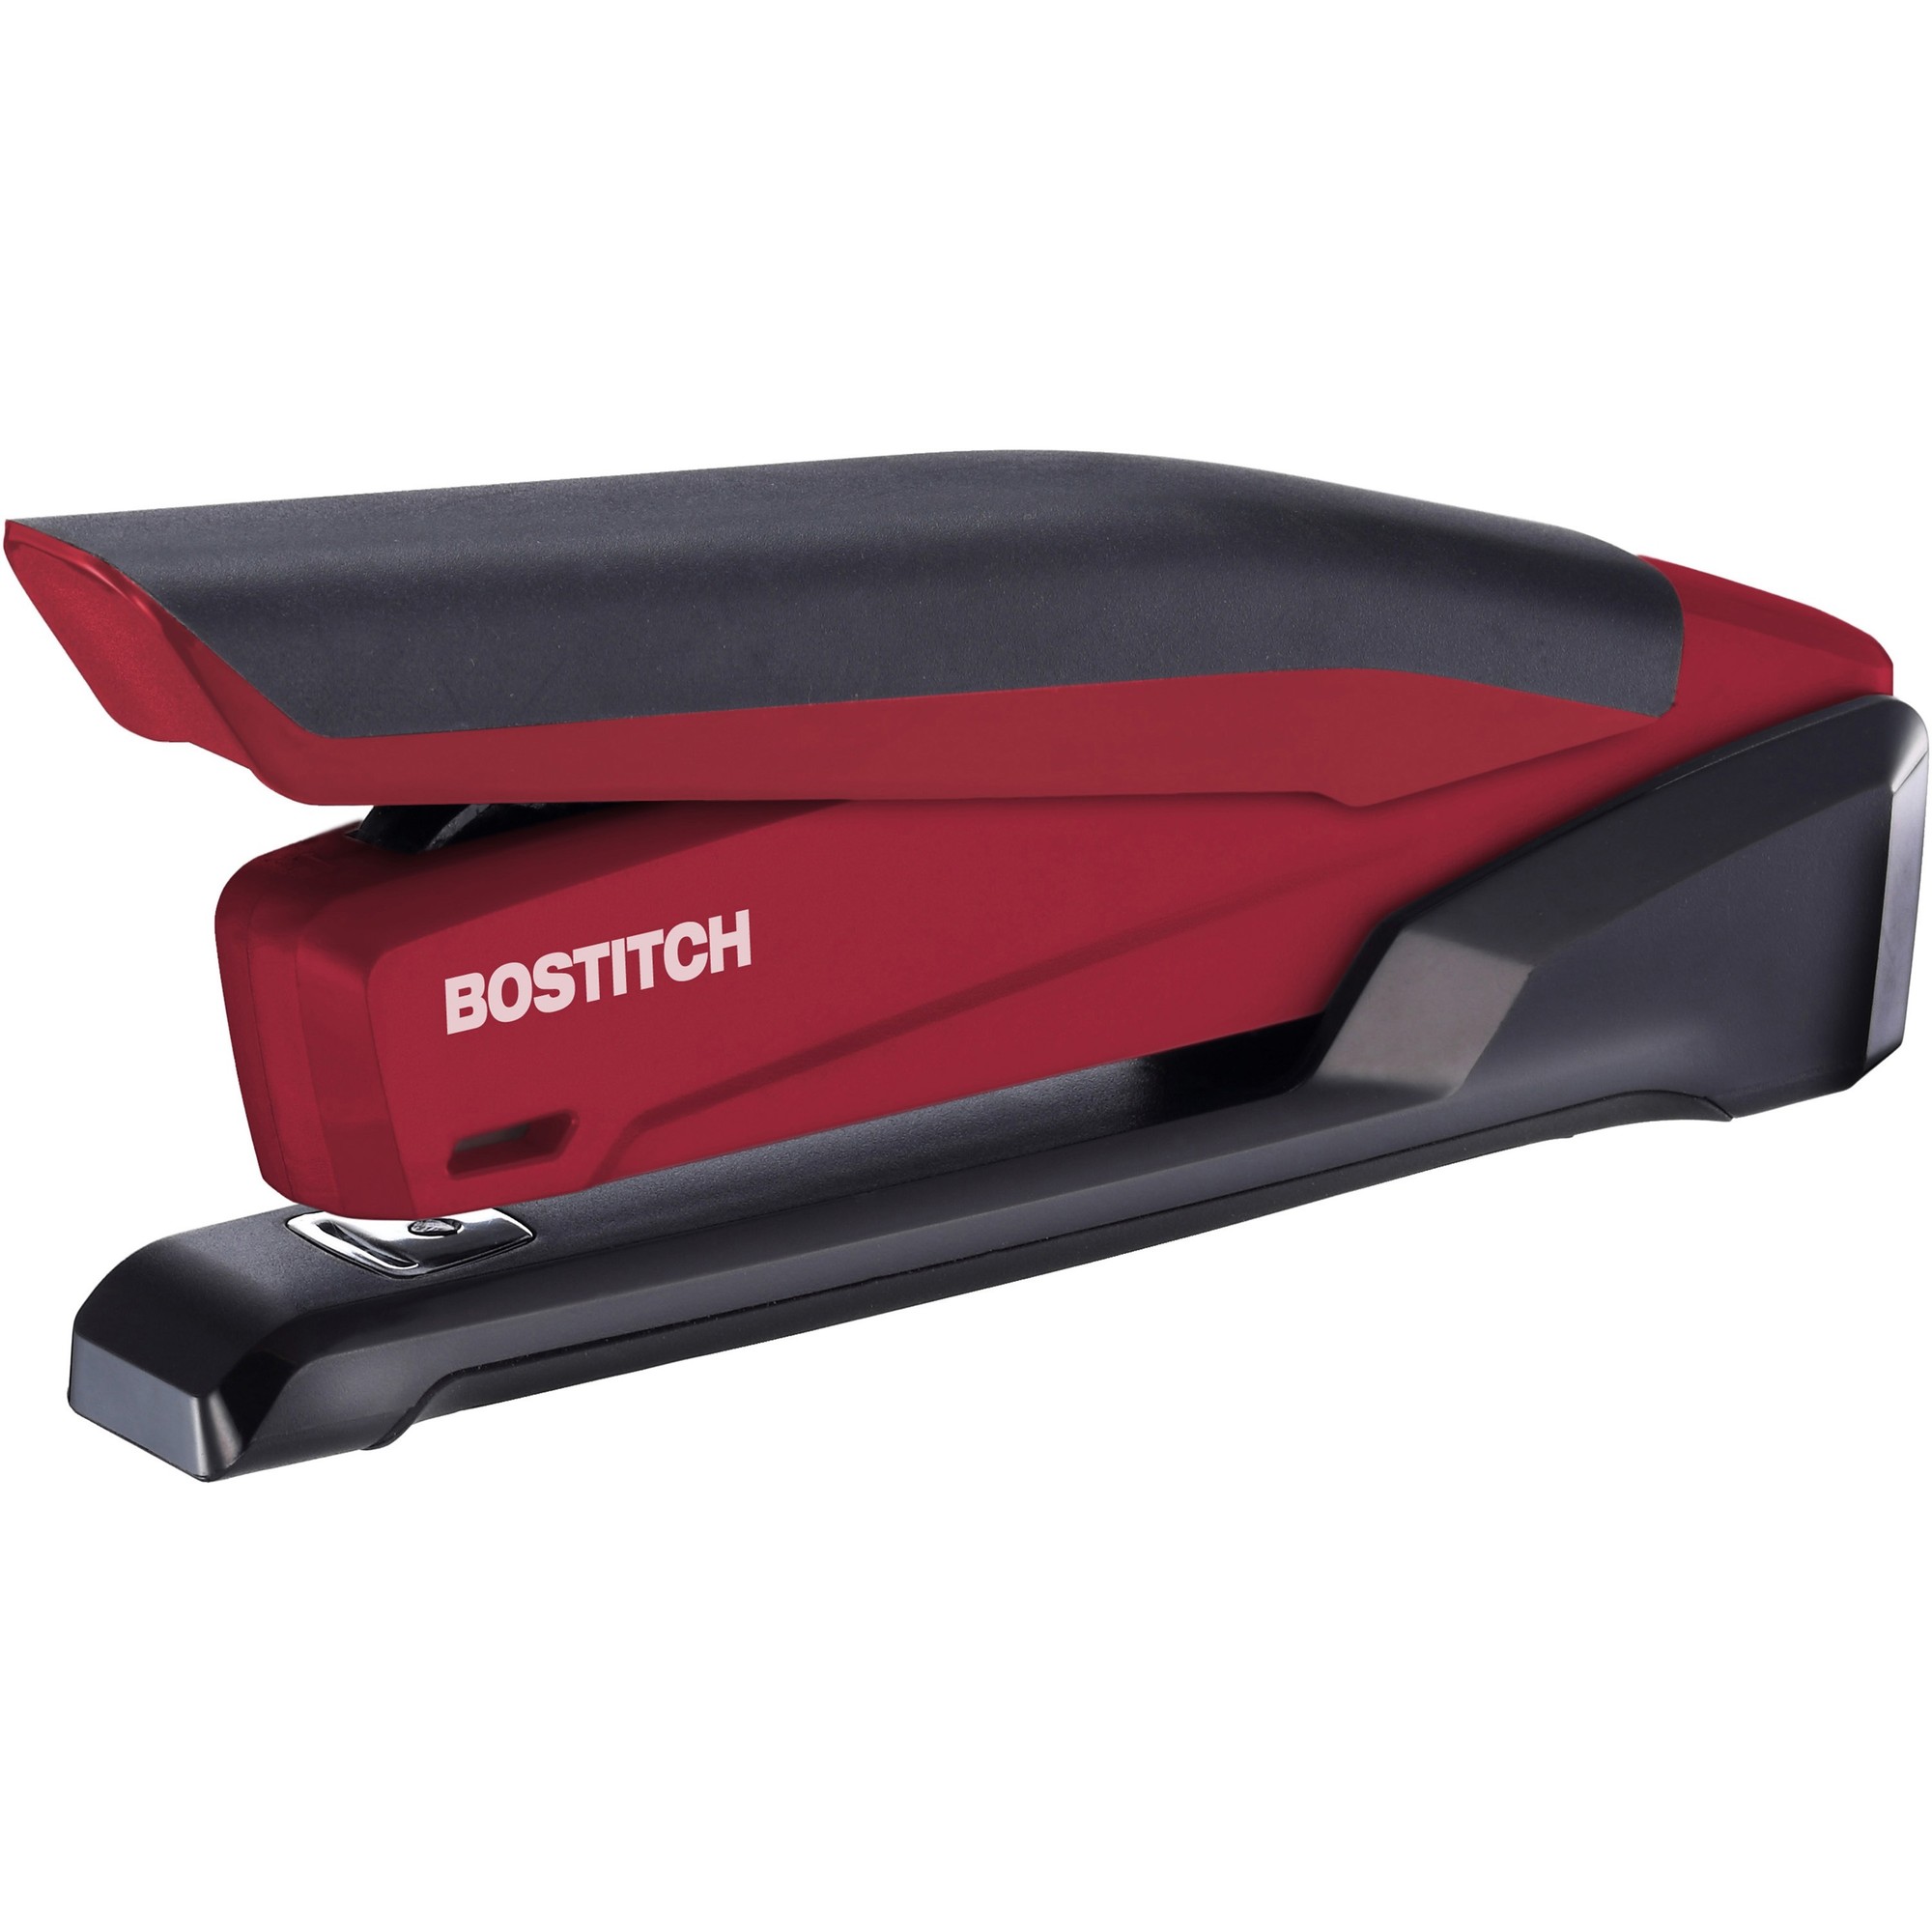 Bostitch InPower Spring-Powered Antimicrobial Desktop Stapler - 20 Sheets Capacity - 210 Staple Capacity - Full Strip - Red